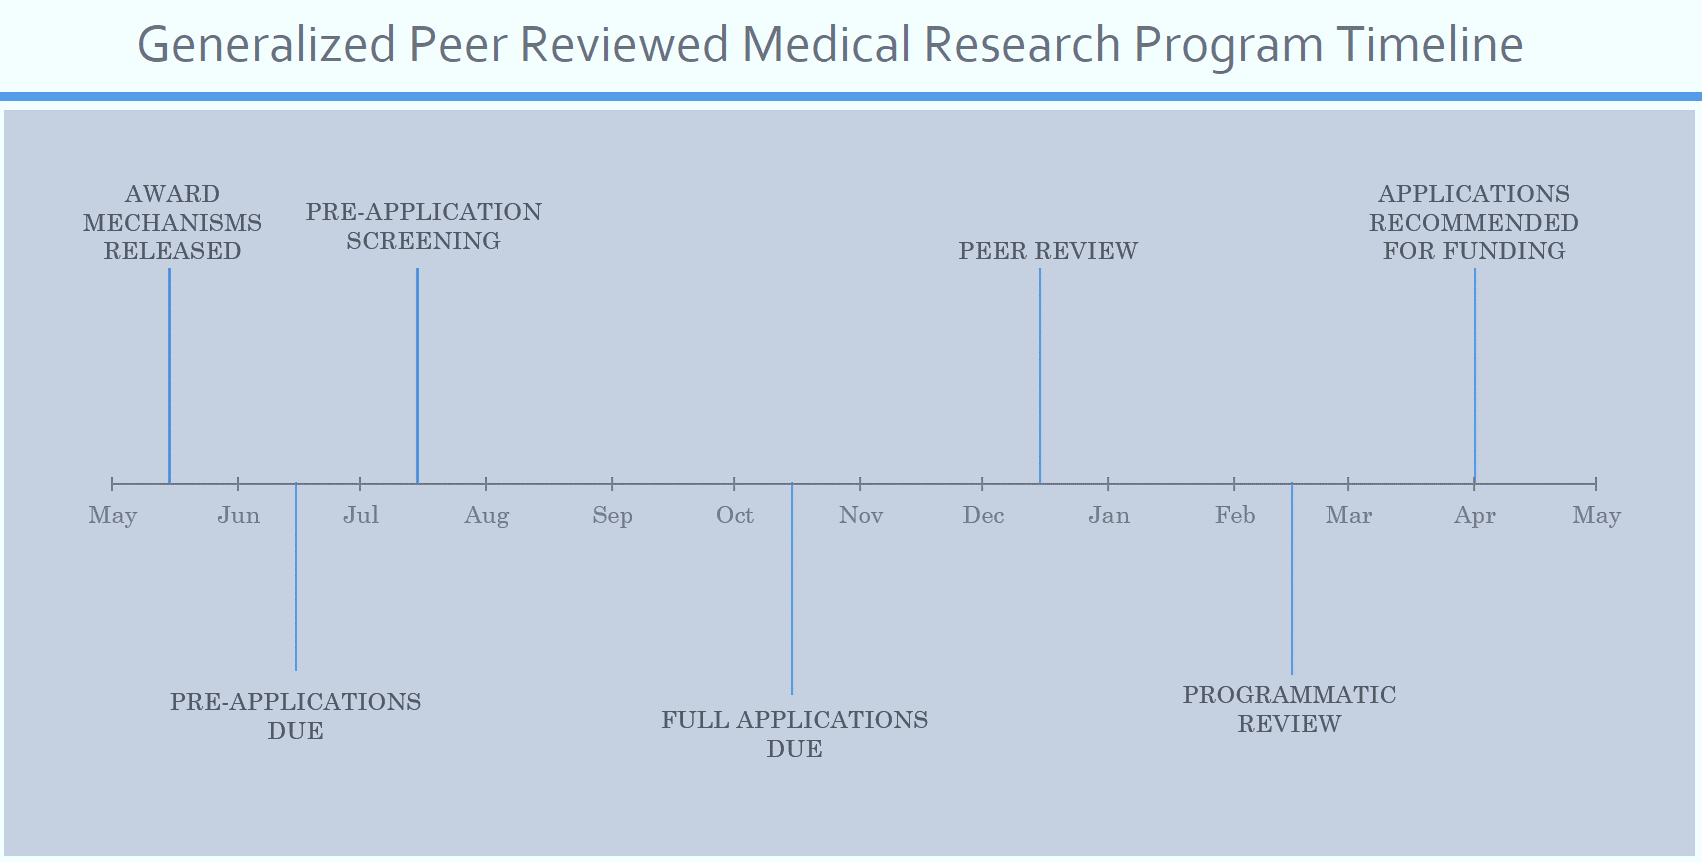 Generalized Peer Reviewed Medical Research Program Timeline
Award Mechanisms Released: May-June
Pre-Applications Due: June-July
Pre-Application Screening: July-August
Full Applications Due: October-November
Peer Review: December-January
Programmatic Review: February-March
Applications Recommended for Funding: April